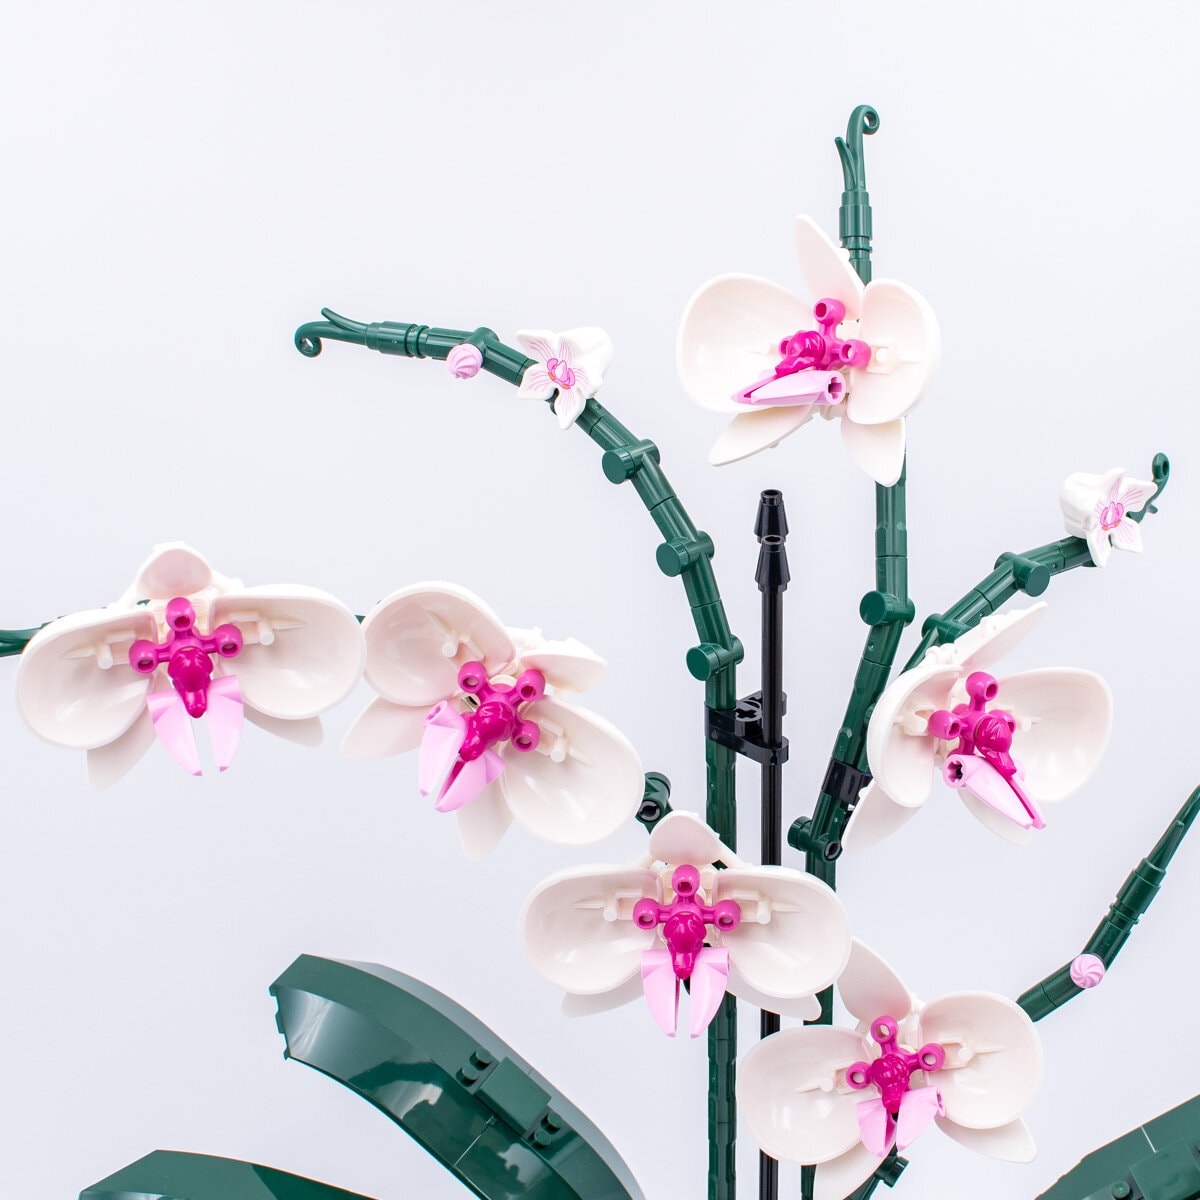 Review LEGO Botanical Collection 10311 Orchid - HelloBricks